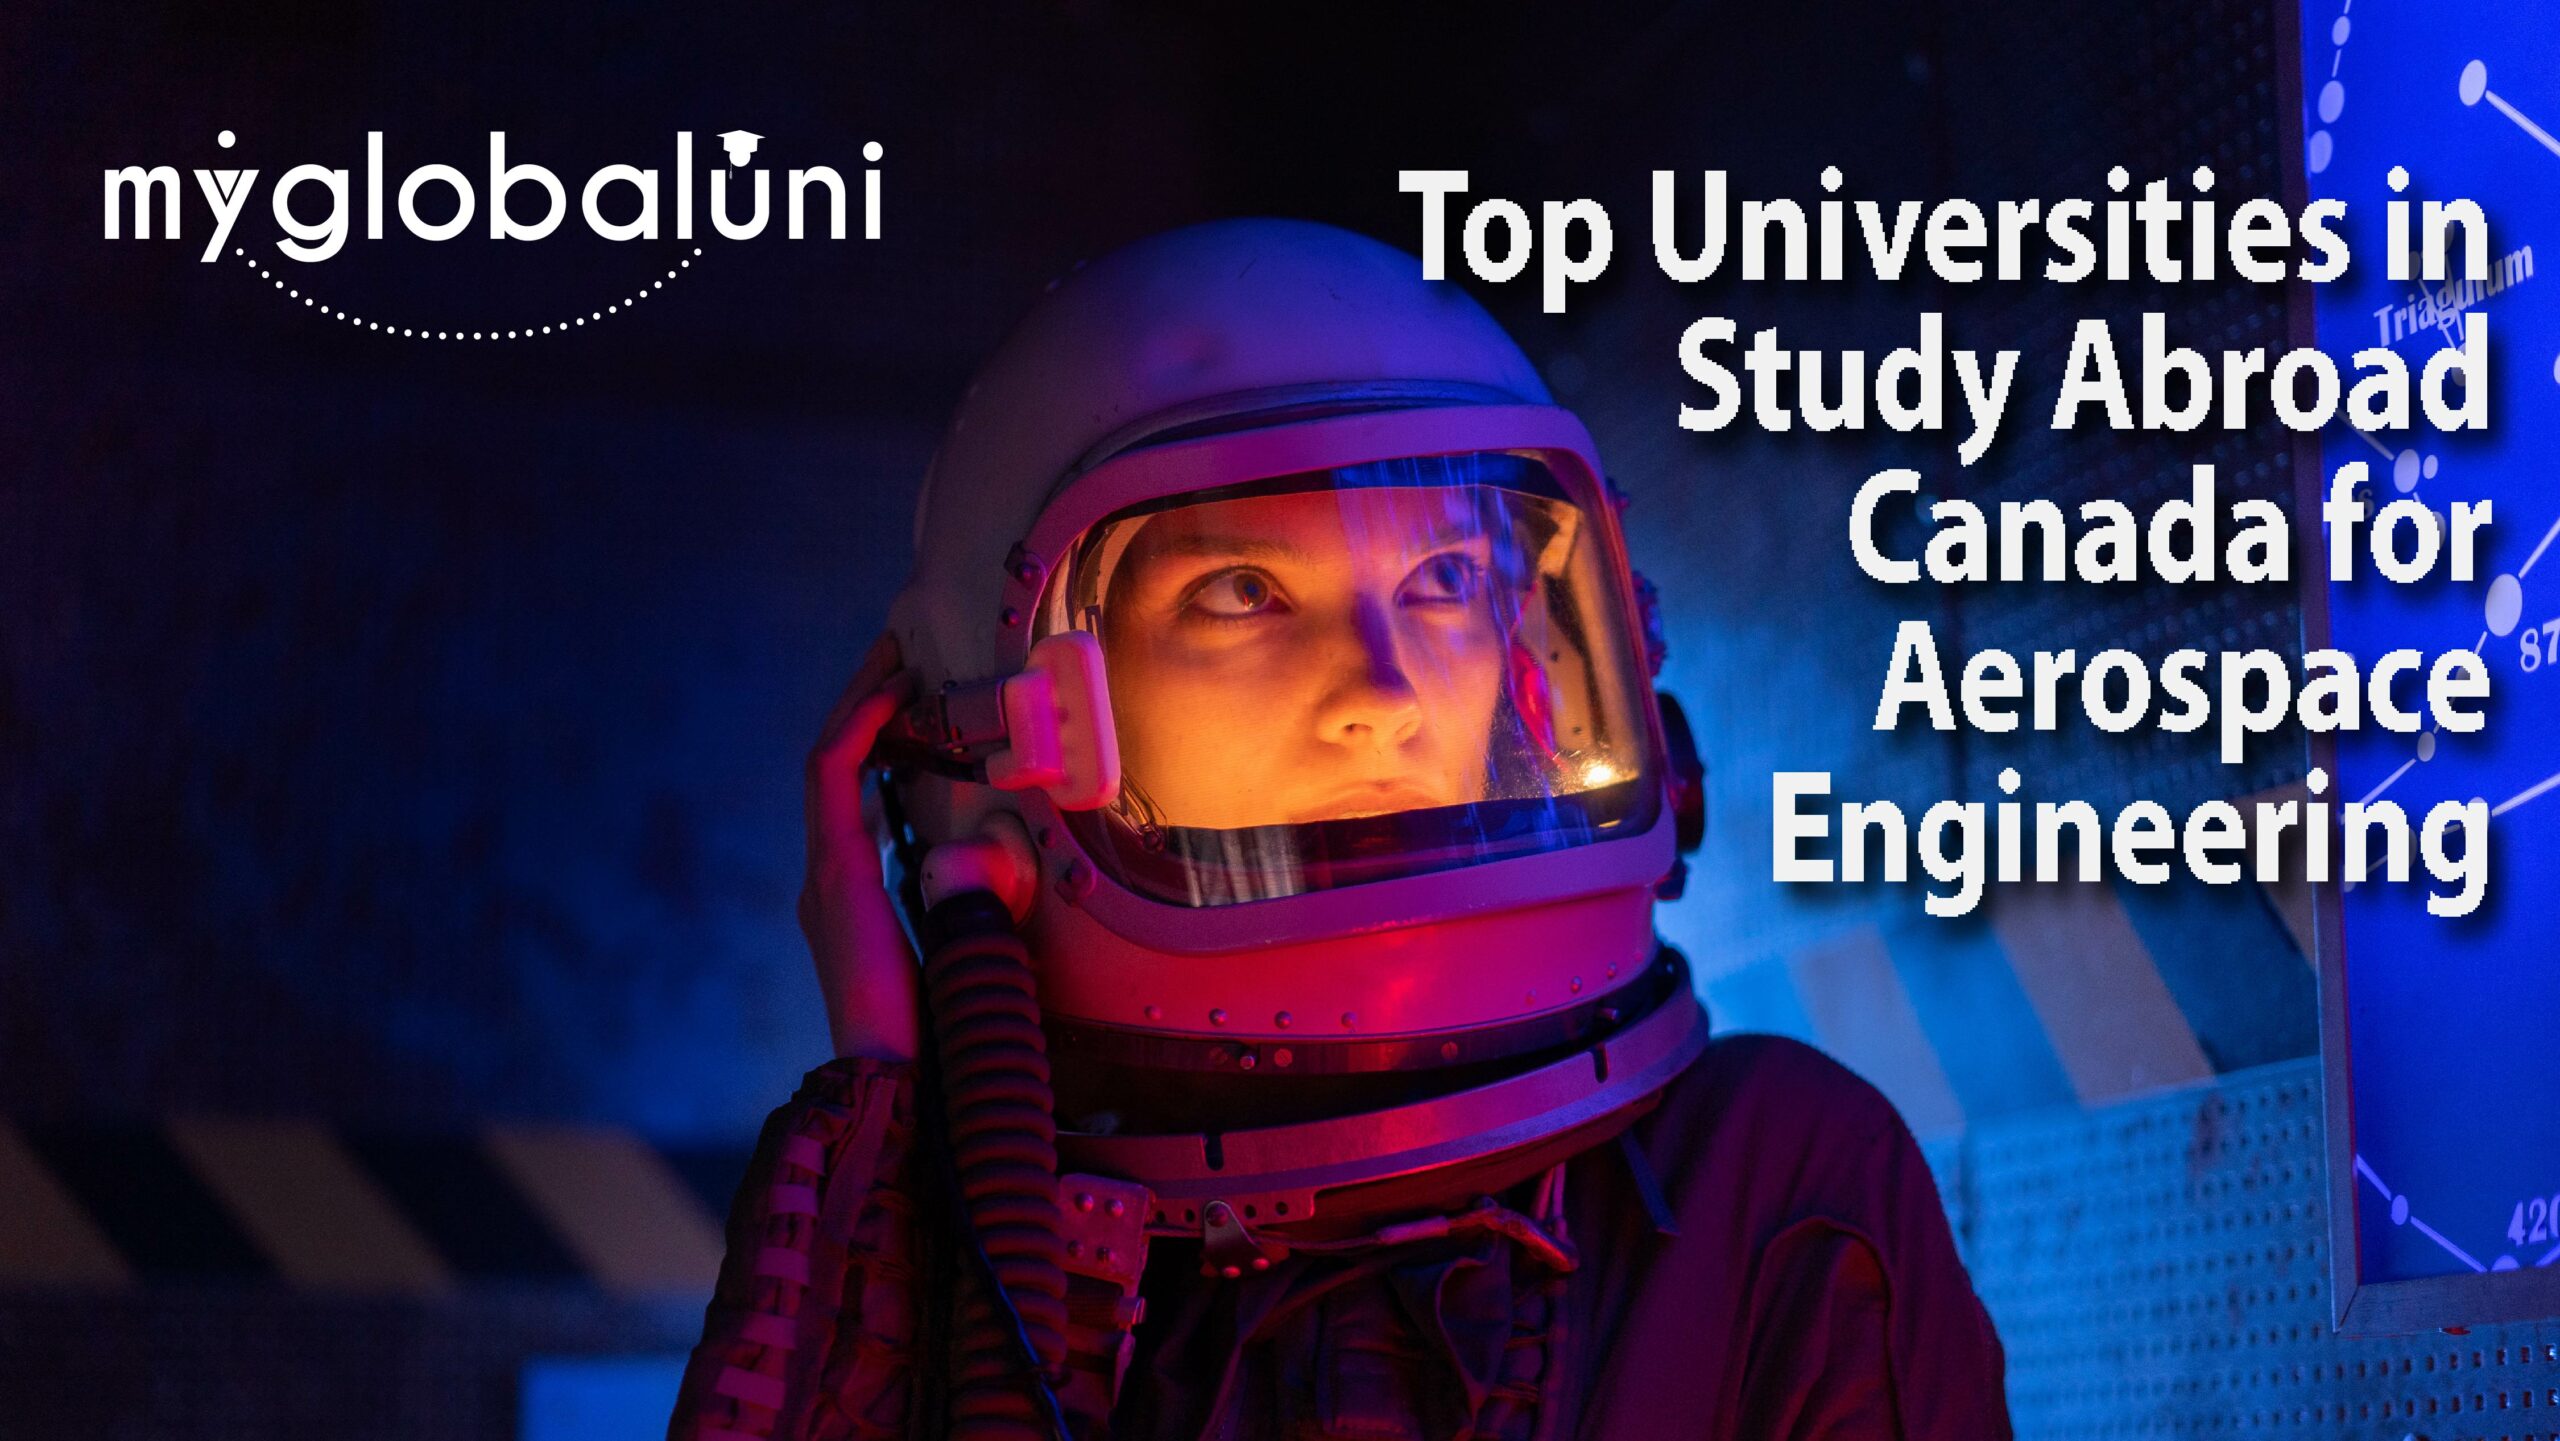 Top Universities in Study Abroad Canada for Aerospace Engineering